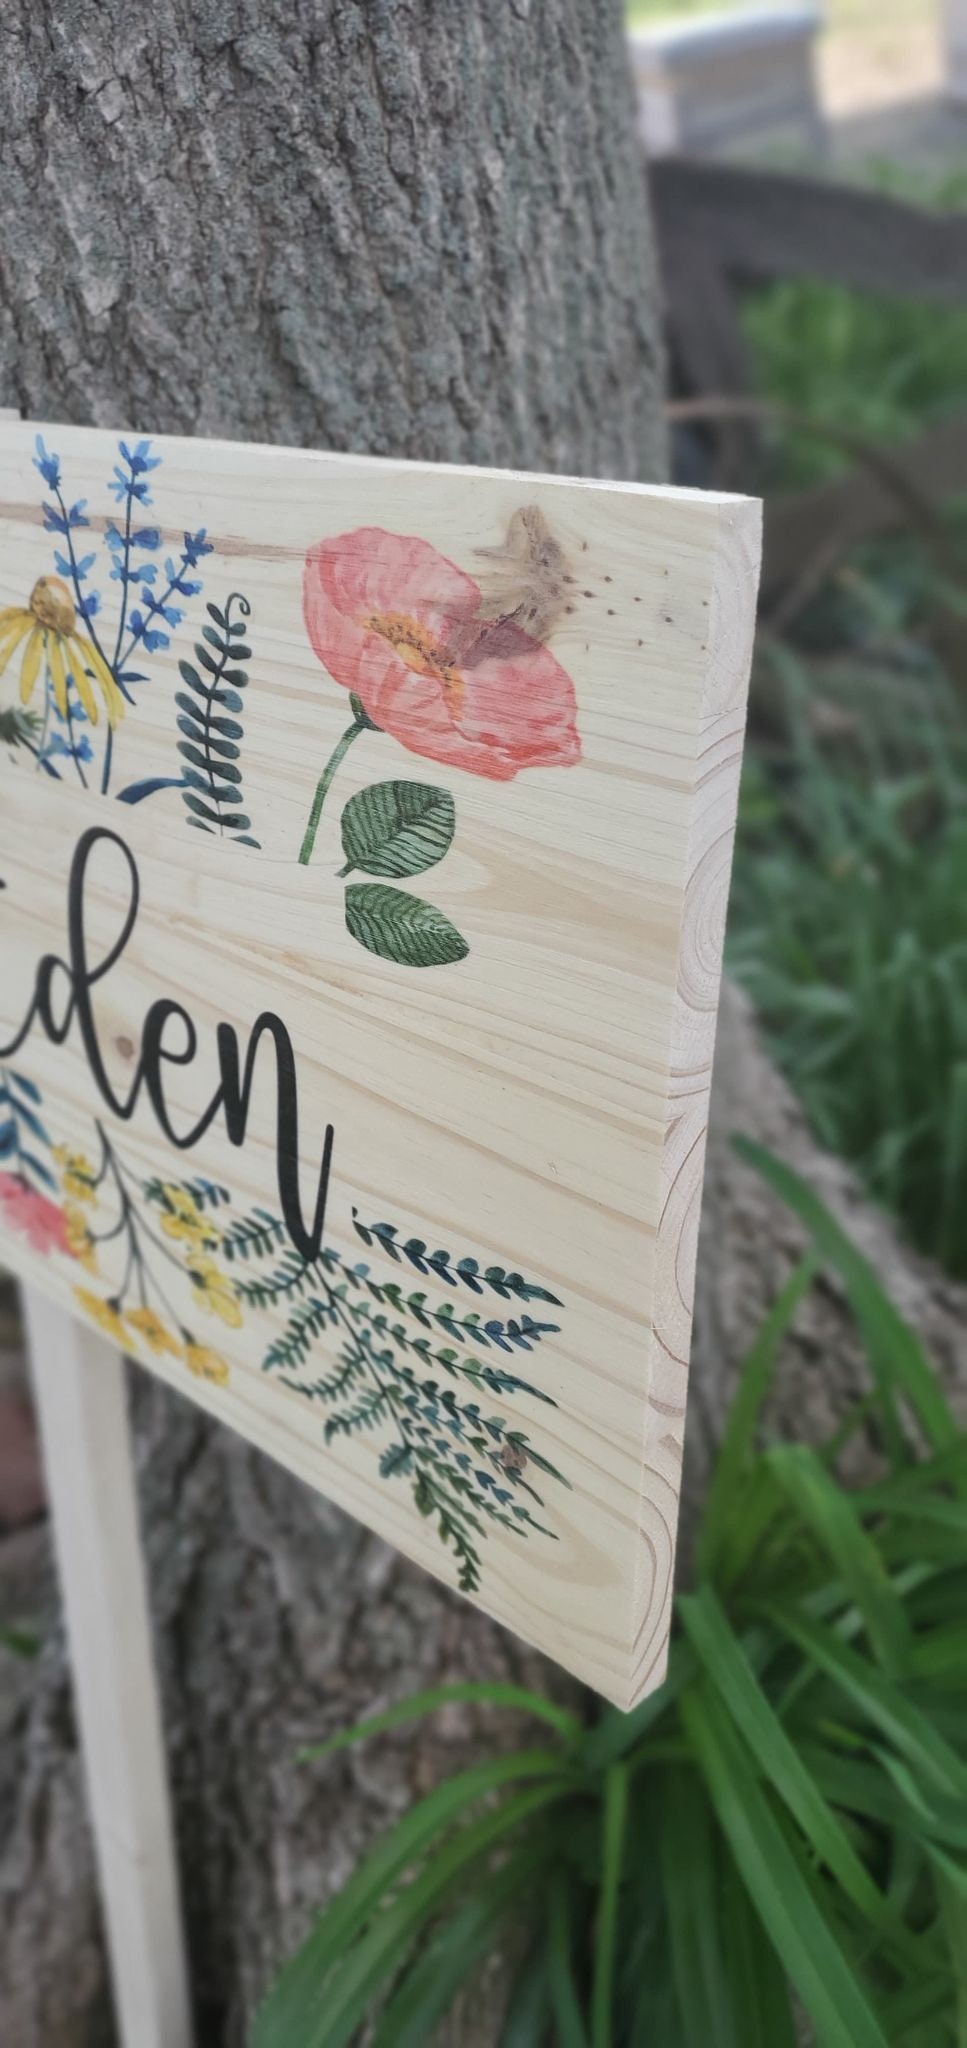 Our Eden Garden Floral Sign Mothers Gift Wife Gift Gardener Flowers Printed On Wood Decoration Poppy Color Bright Spring Summer Wooden Sign